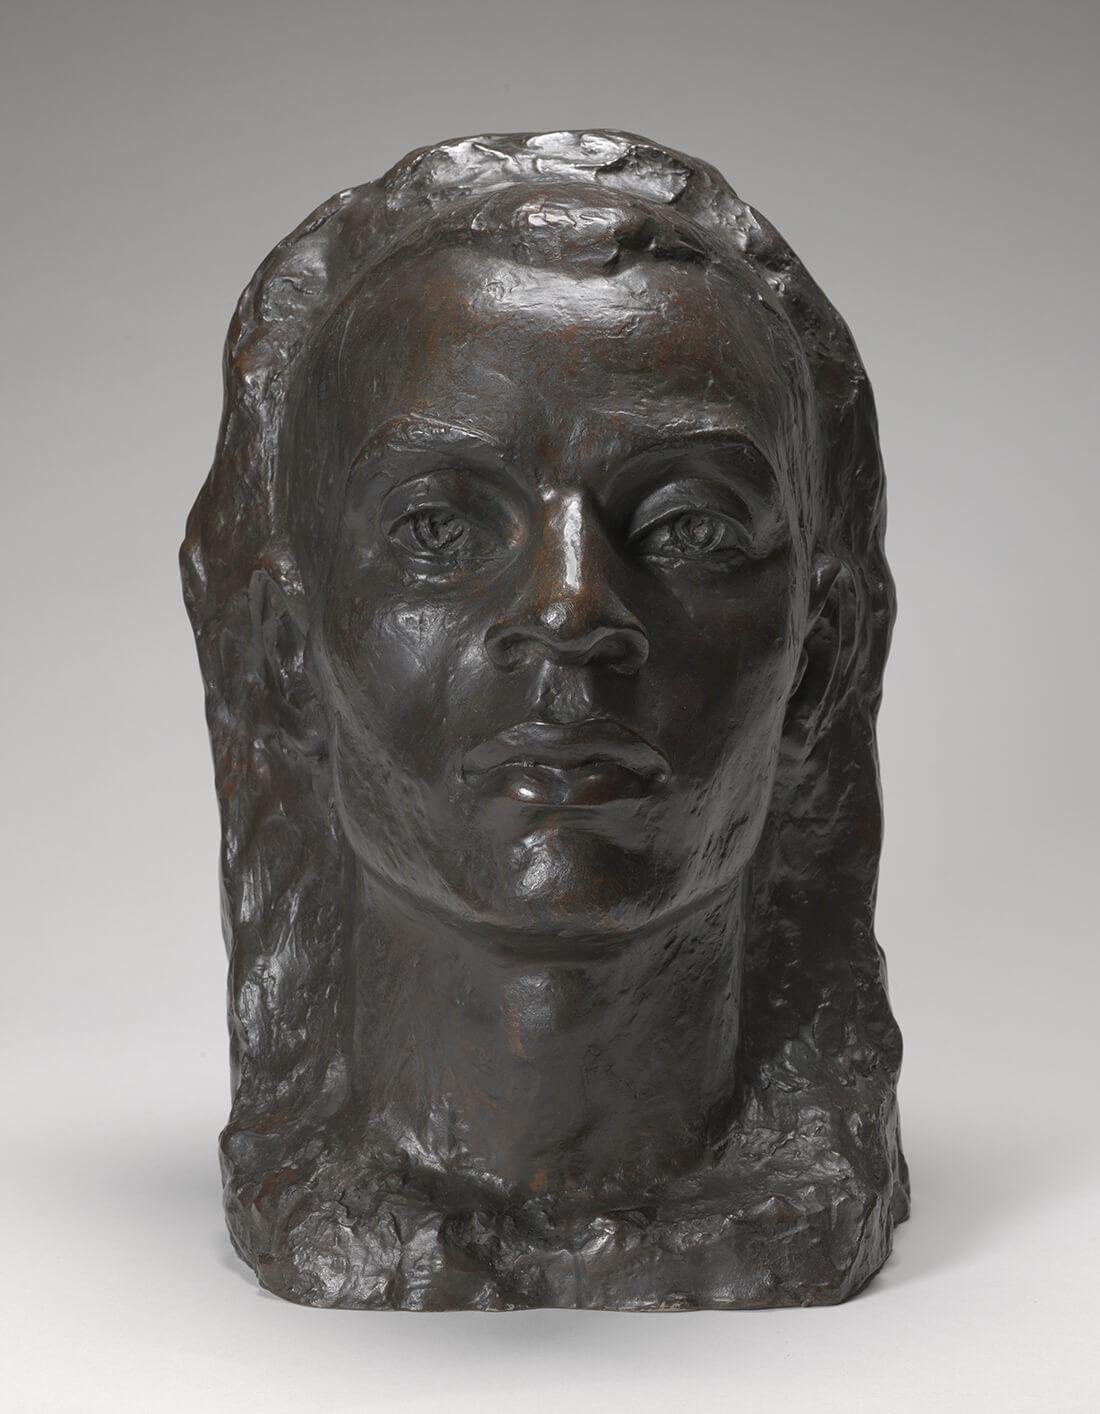 A bronze cast of the head of a man